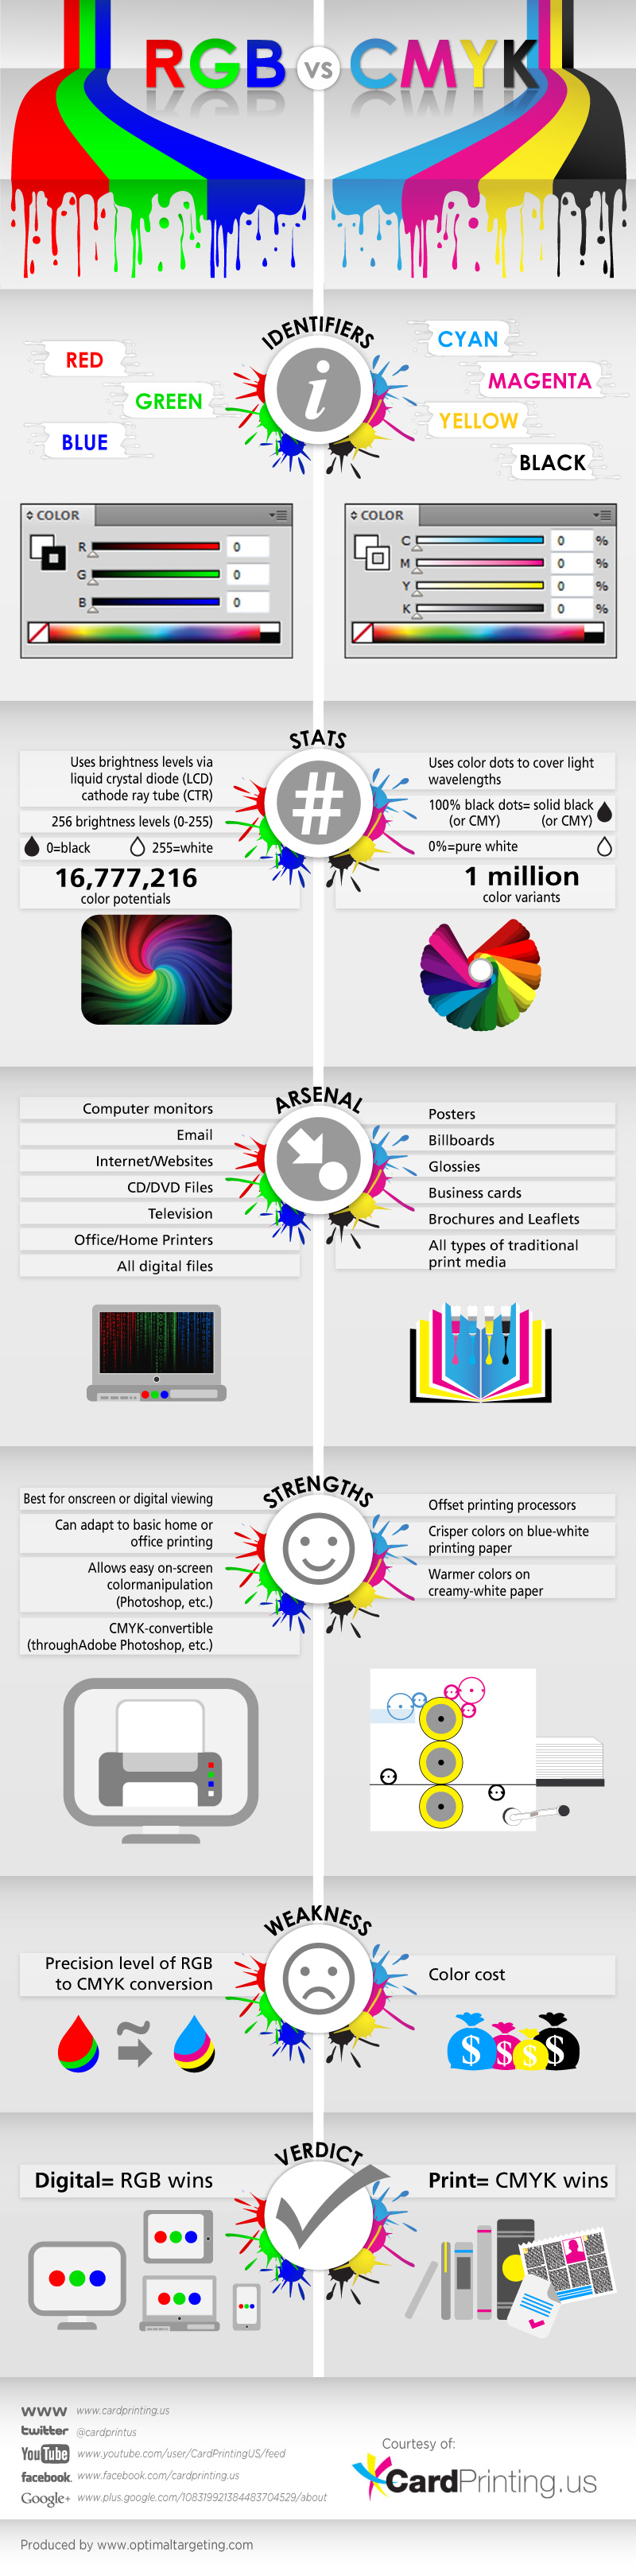 An infographic weighing the pros and cons of using both RGB versus CMYK color codes in the printing process.